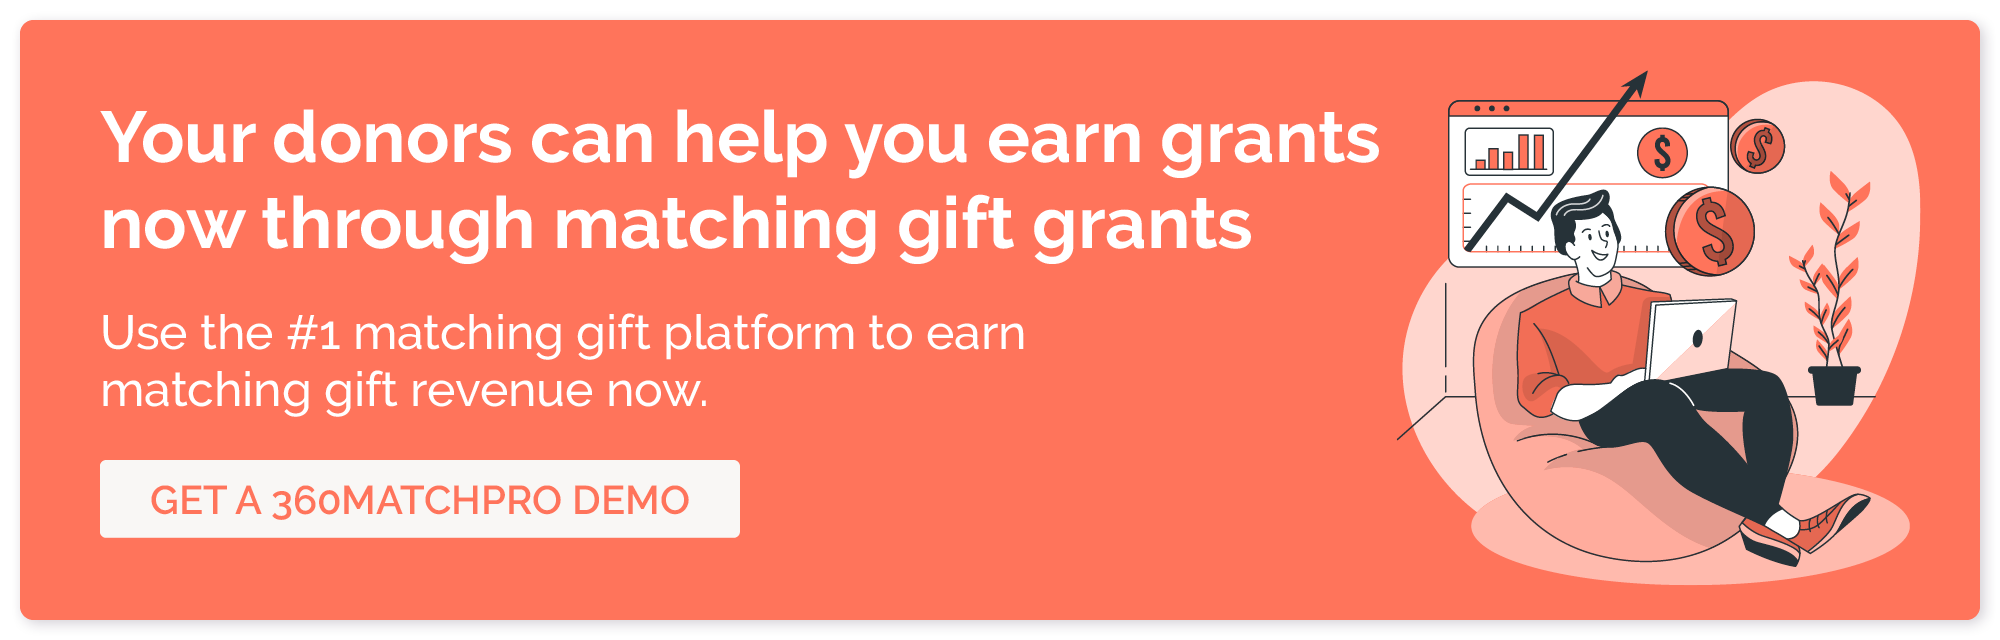 Your donors can help you earn grants now through matching gift grants. Use the #1 matching gift platform to earn matching gift revenue now.